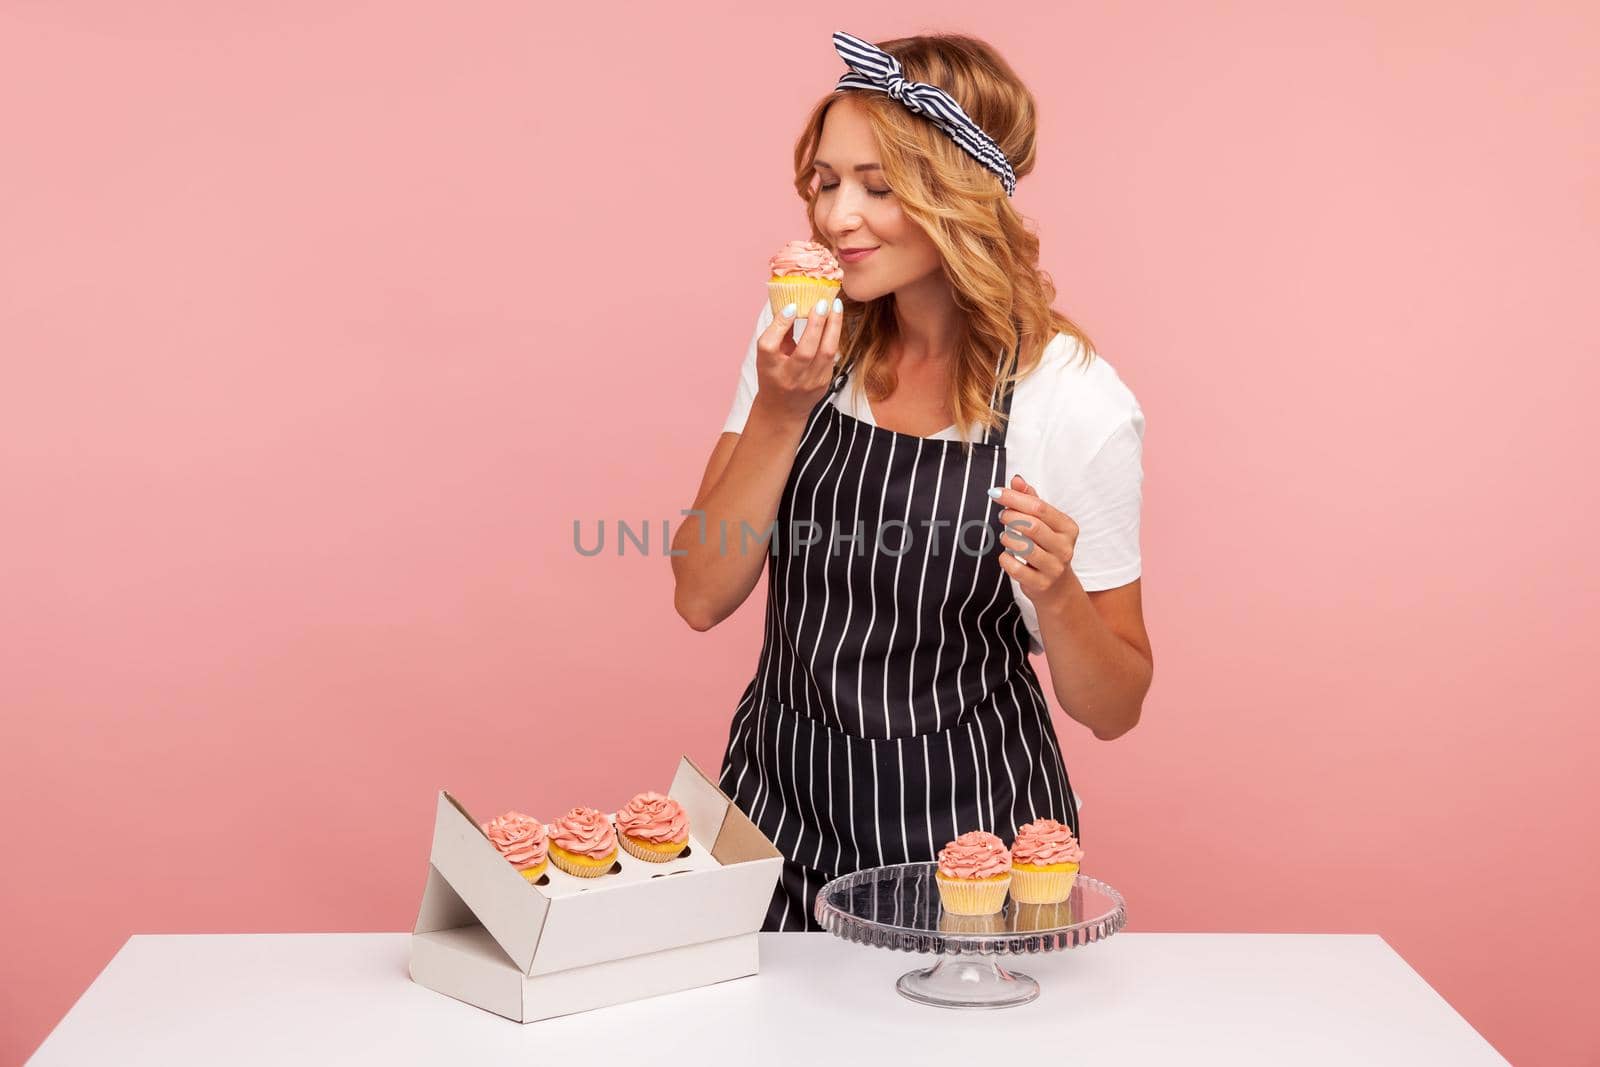 Blonde young adult baker takes out cakes from paper box, preparing for serving to guests, enjoying of smelling tasty dessert with closed eyes. Indoor studio shot isolated on pink background.